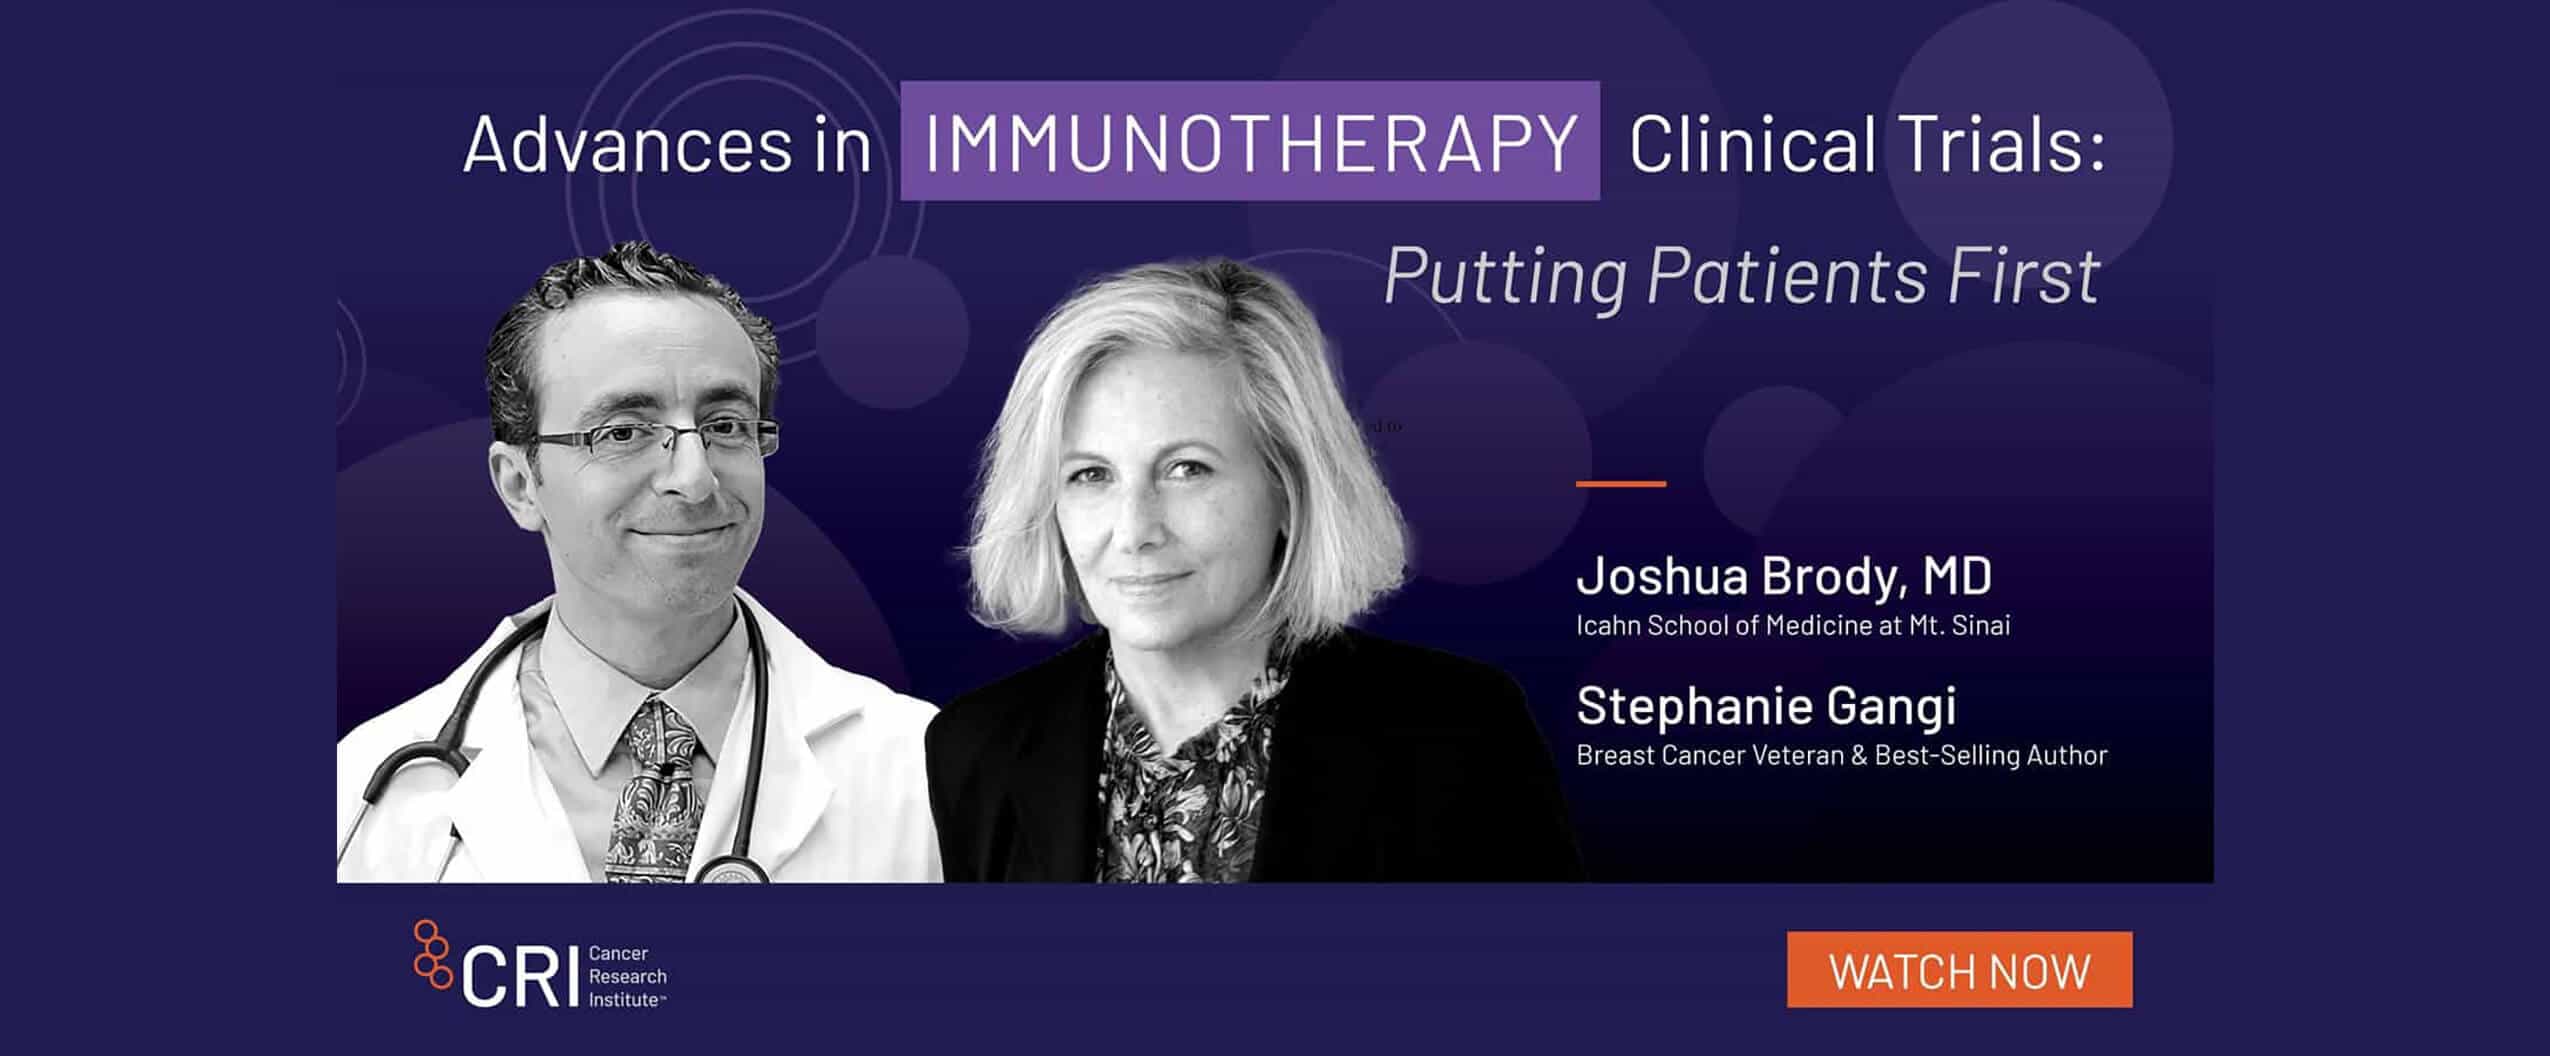 Advances in Immunotherapy Clinical Trials: Putting Patients FIrst